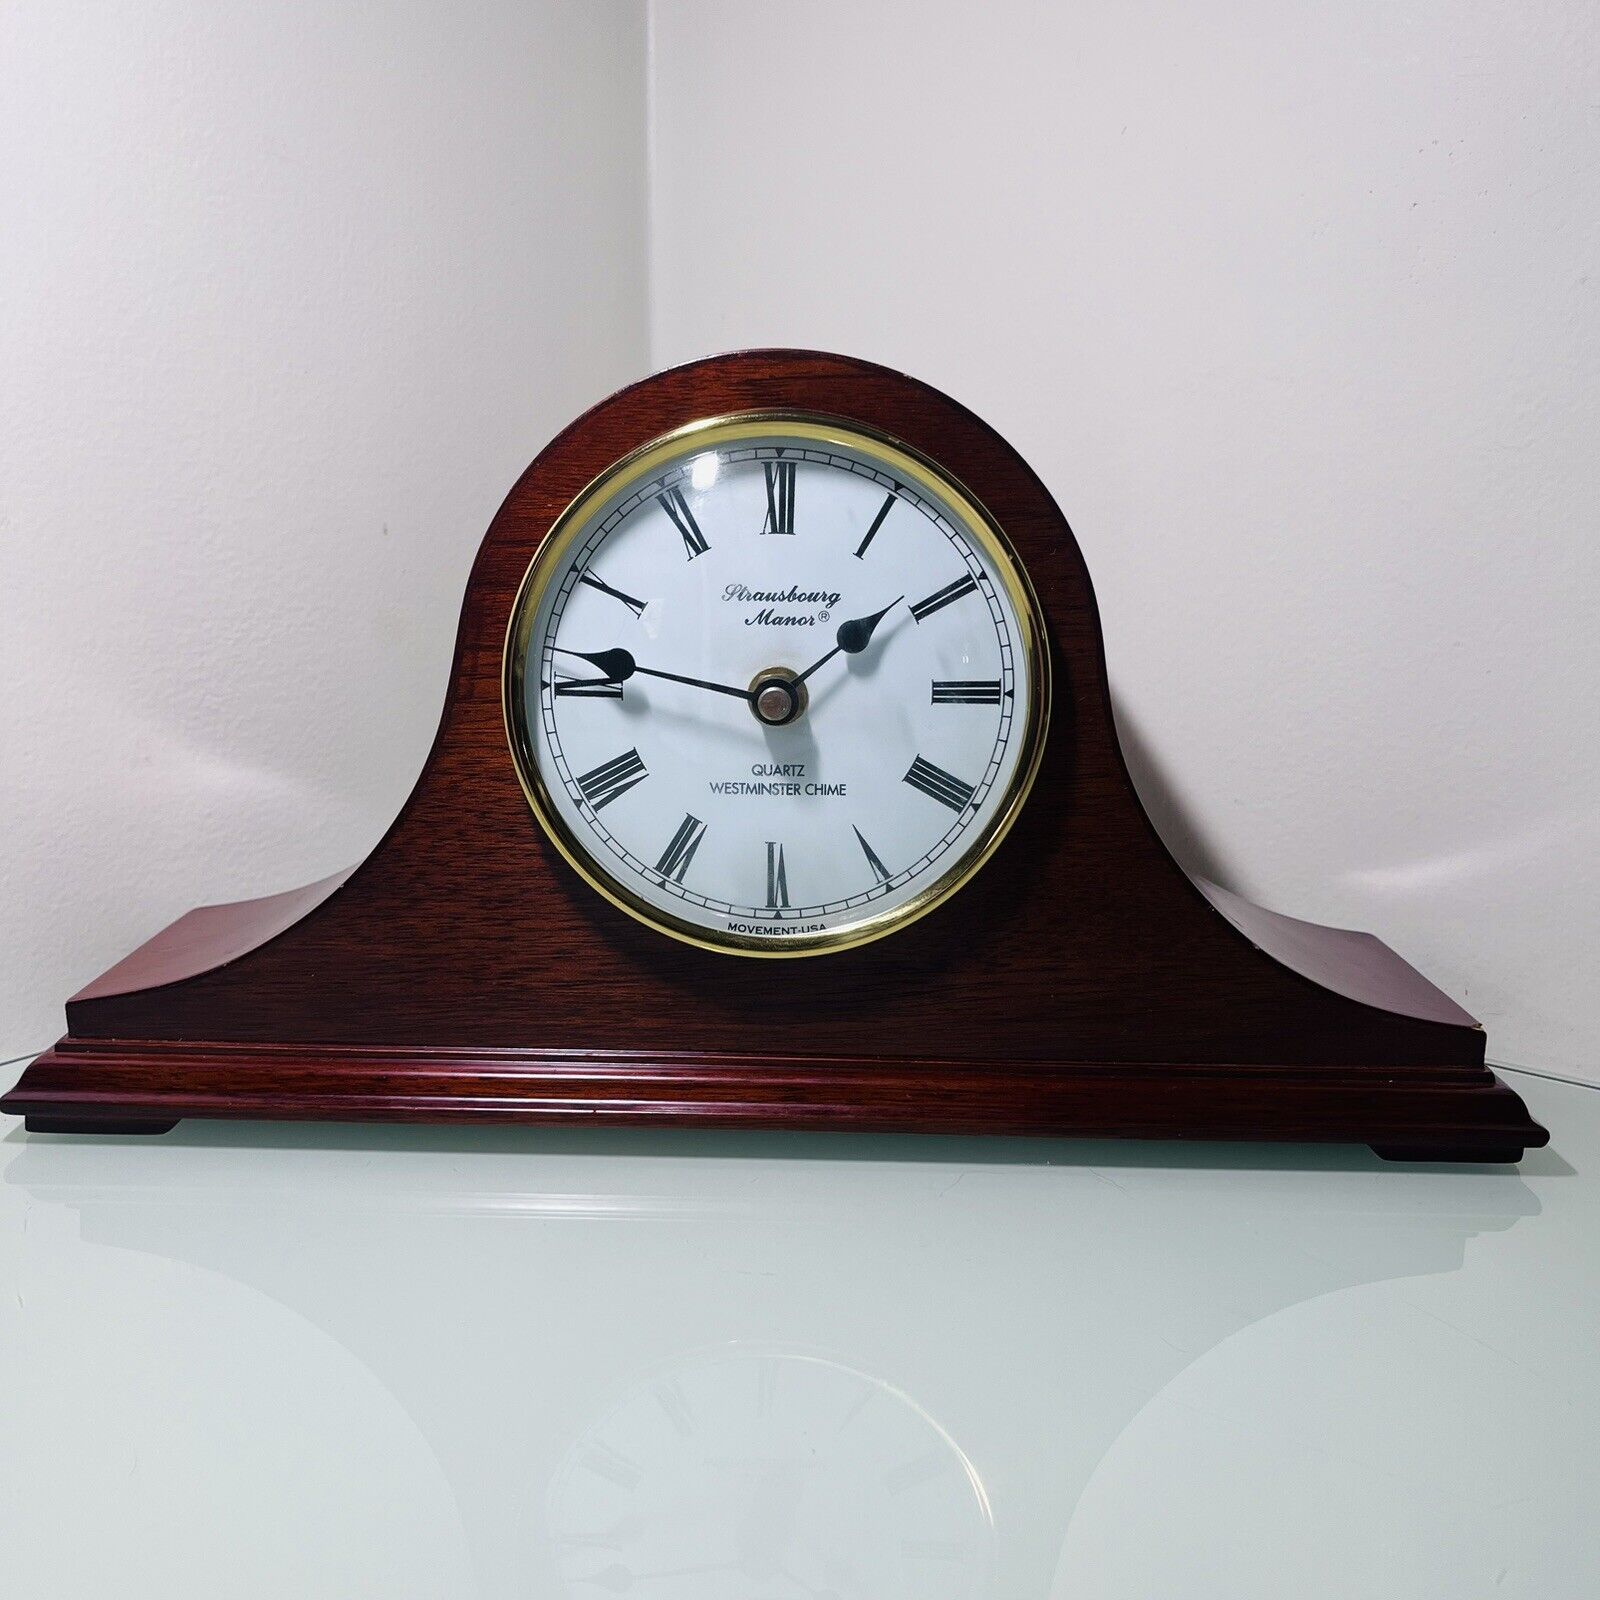 Strausbourg Manor Westminster Chime Quartz Mantle Clock Tested Working